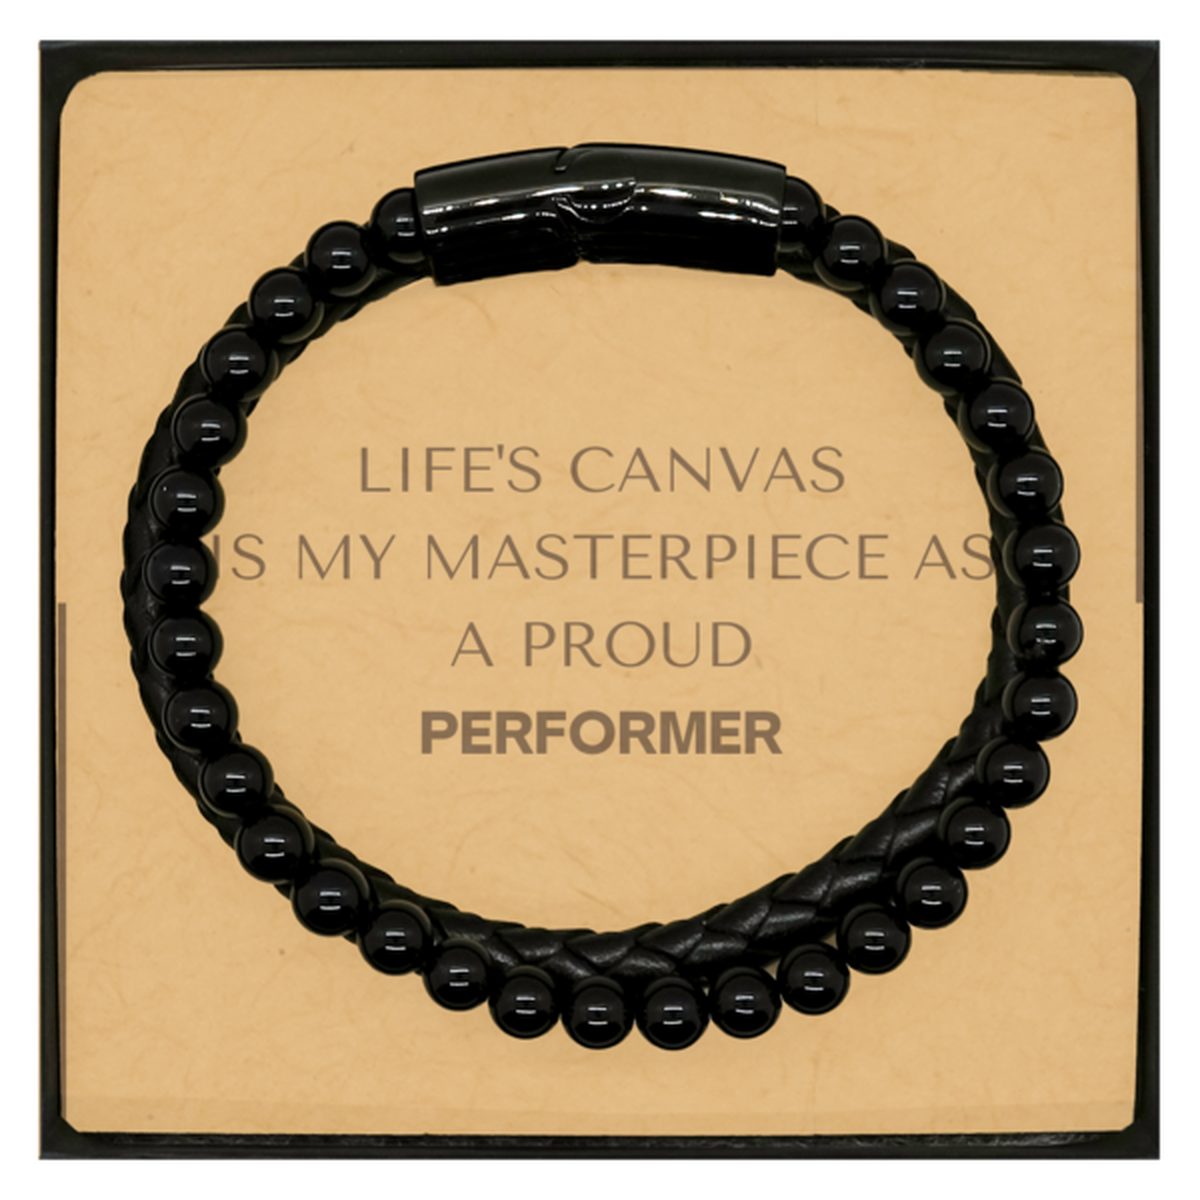 Proud Performer Gifts, Life's canvas is my masterpiece, Epic Birthday Christmas Unique Stone Leather Bracelets For Performer, Coworkers, Men, Women, Friends